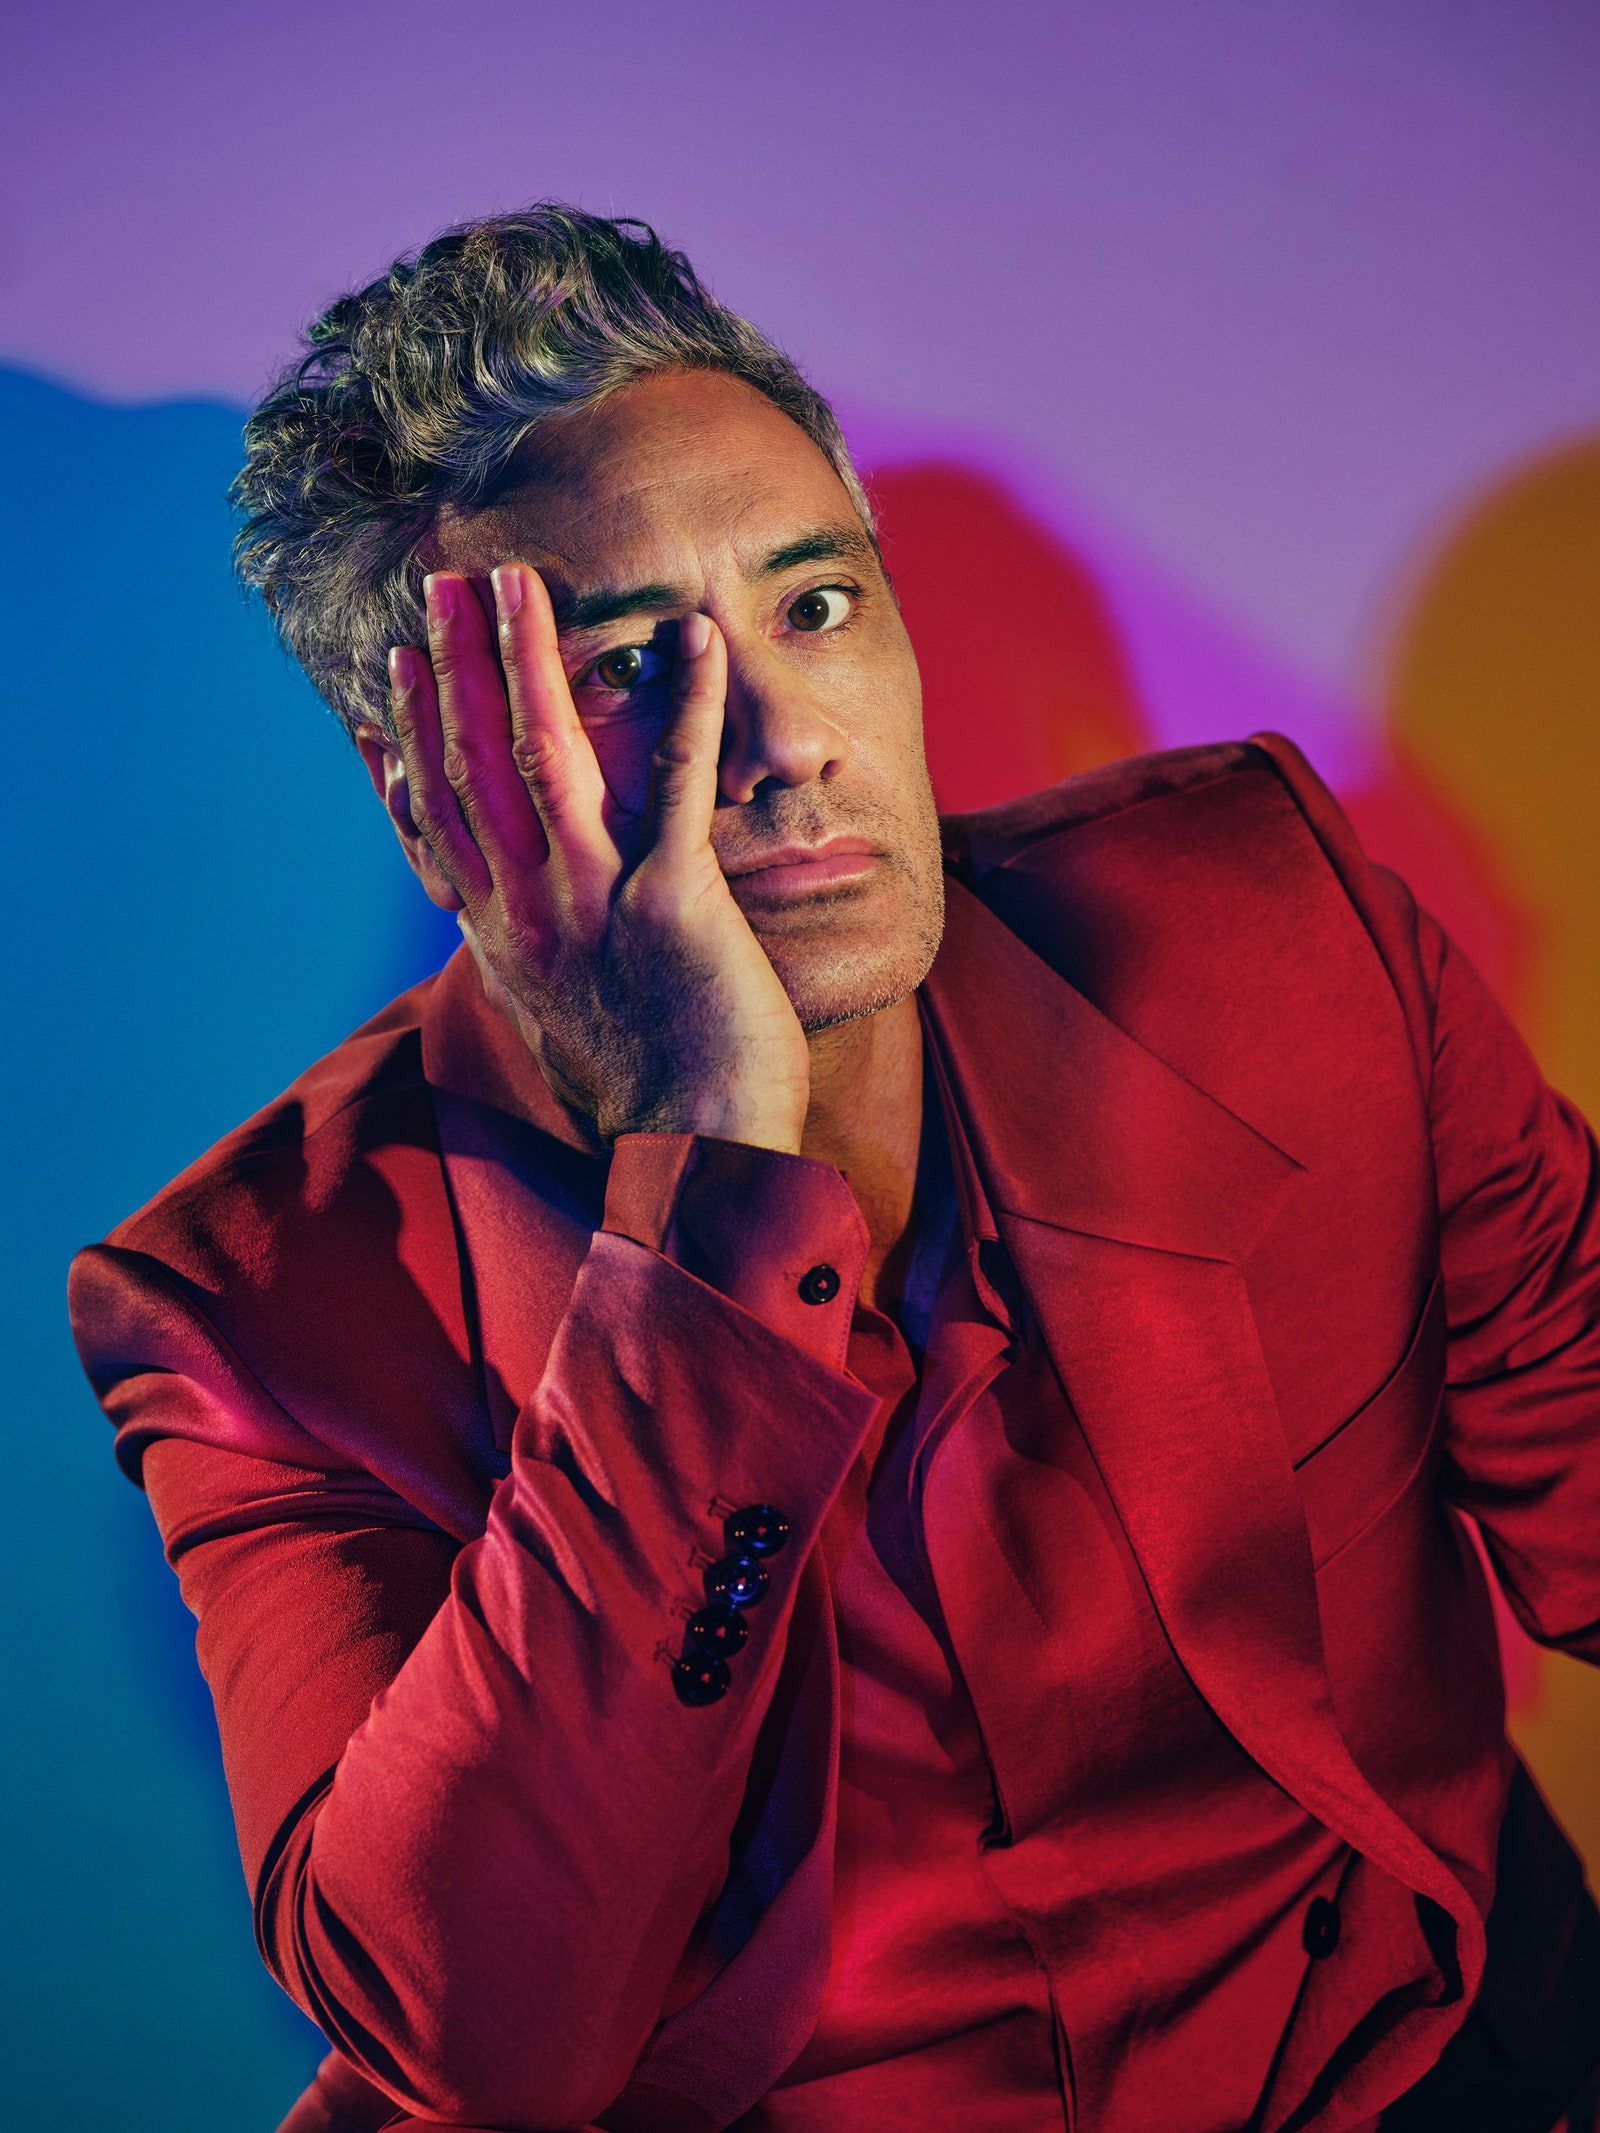 Photograph of Taika Waititi with his hand on his face